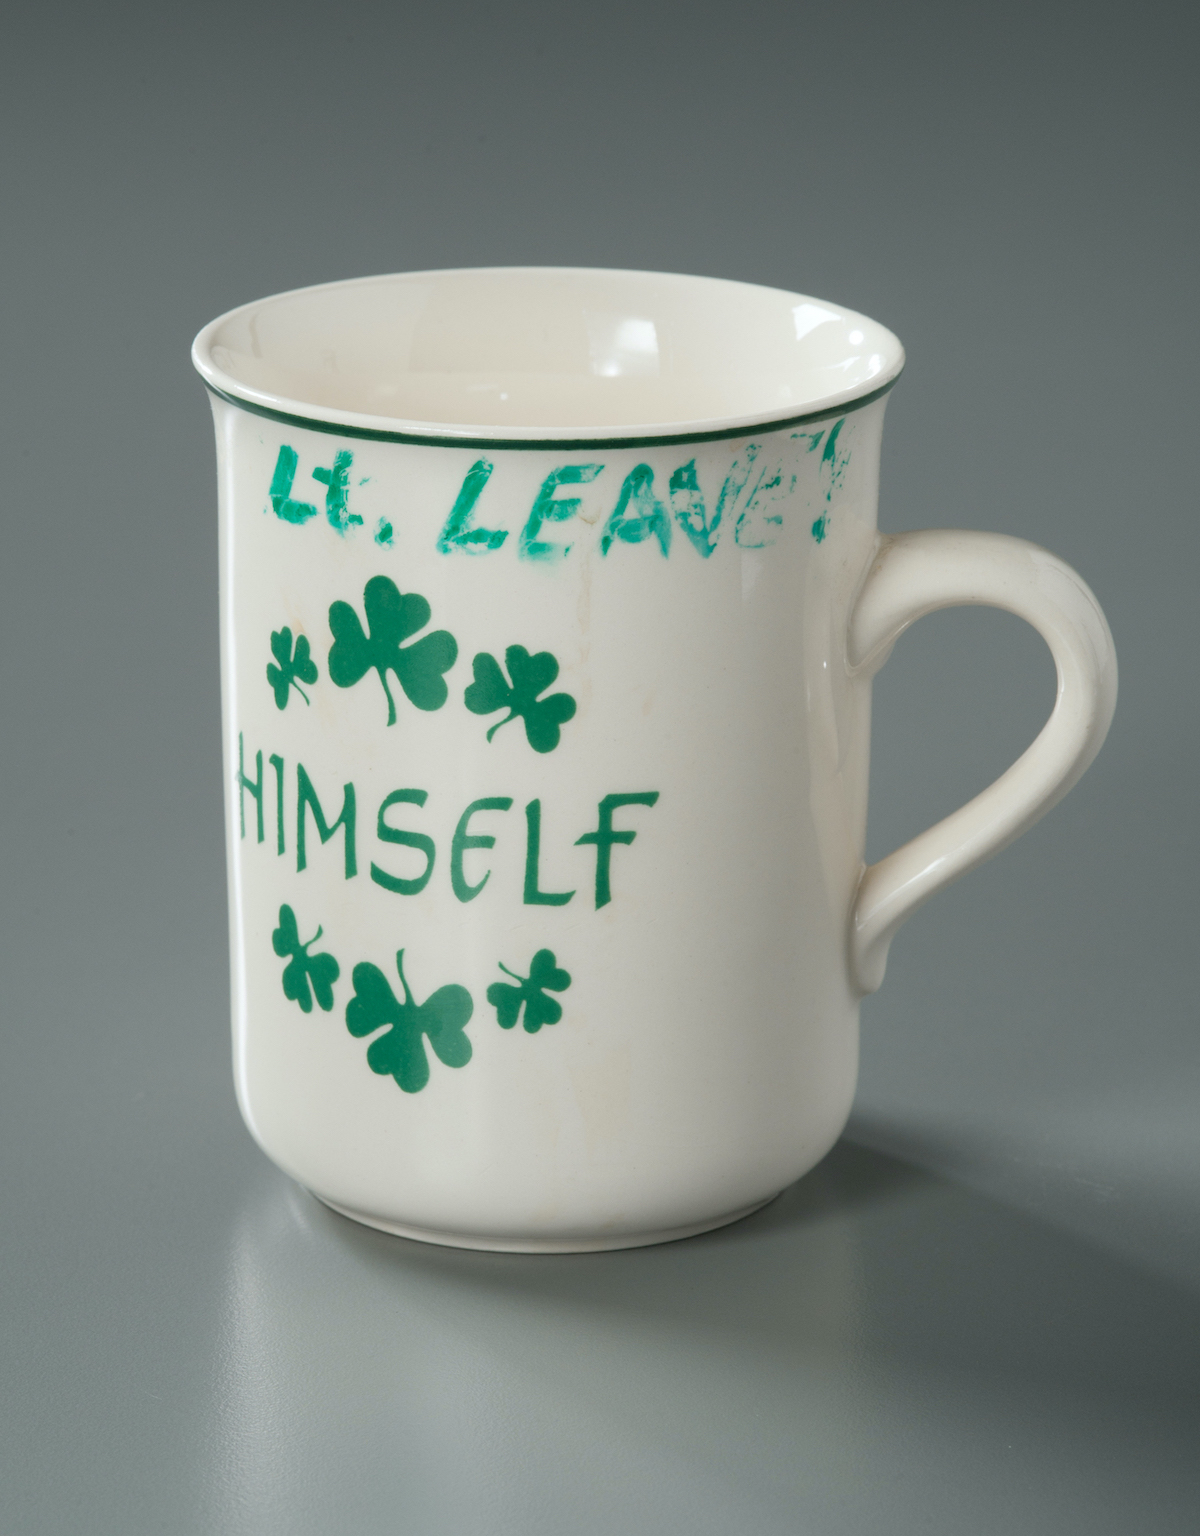 A mug belonging to FDNY Lieutenant Joseph Leavey is displayed on a gray surface at the museum. The white mug is adorned with green shamrocks. The word "himself" is printed in green on the mug. Leavey's name has been written in green marker on the lip of the cup. 